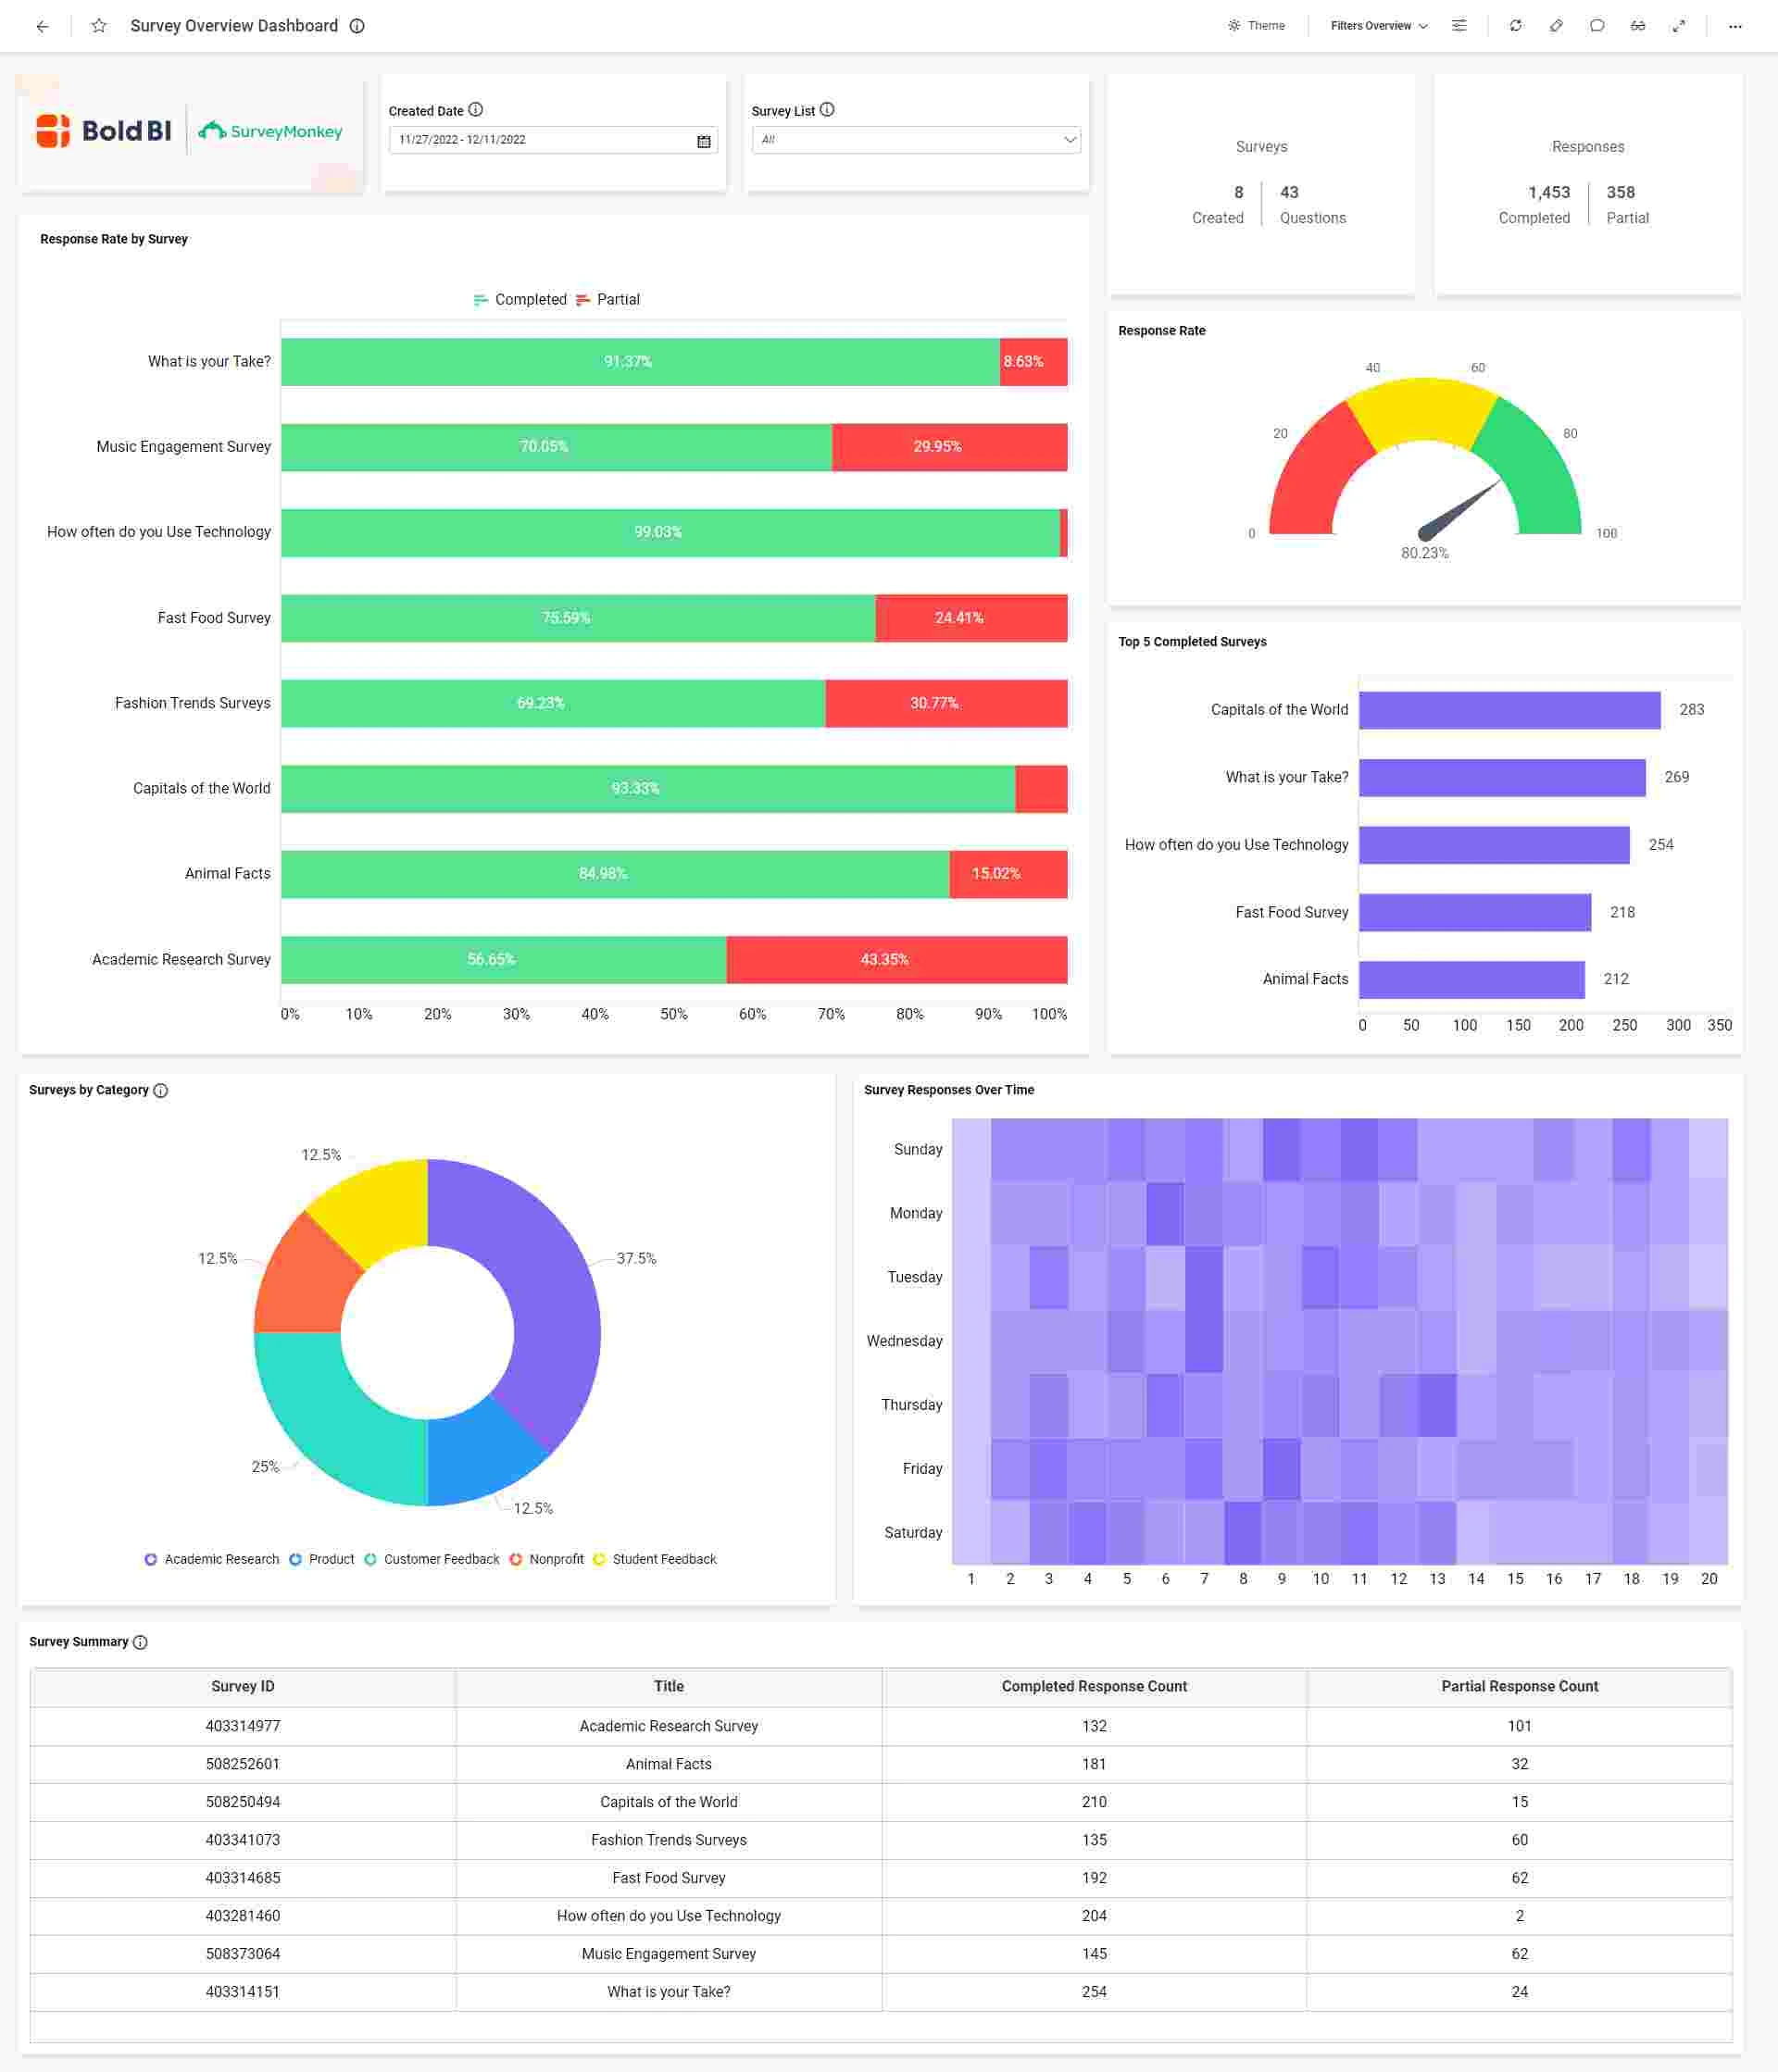 Survey Overview Dashboard